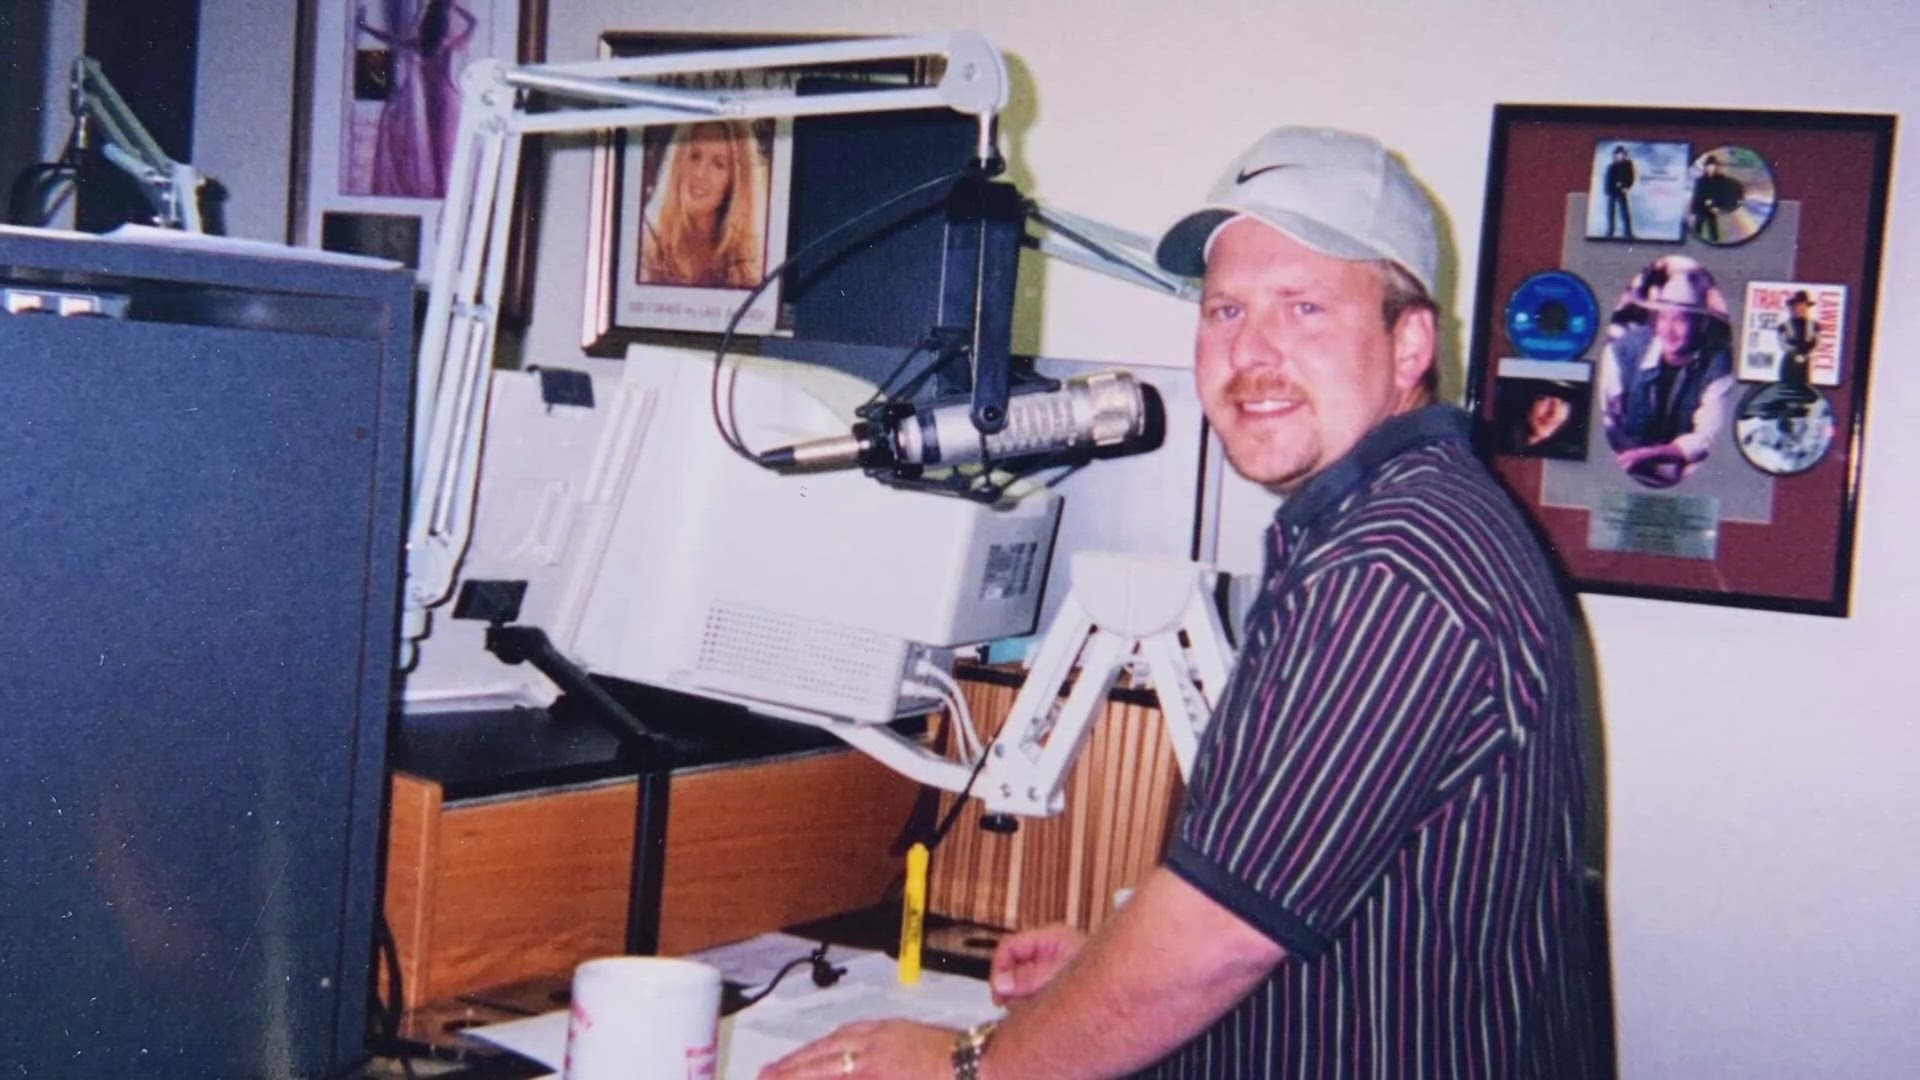 The radio host has been battling liver cancer and he is now in hospice care.